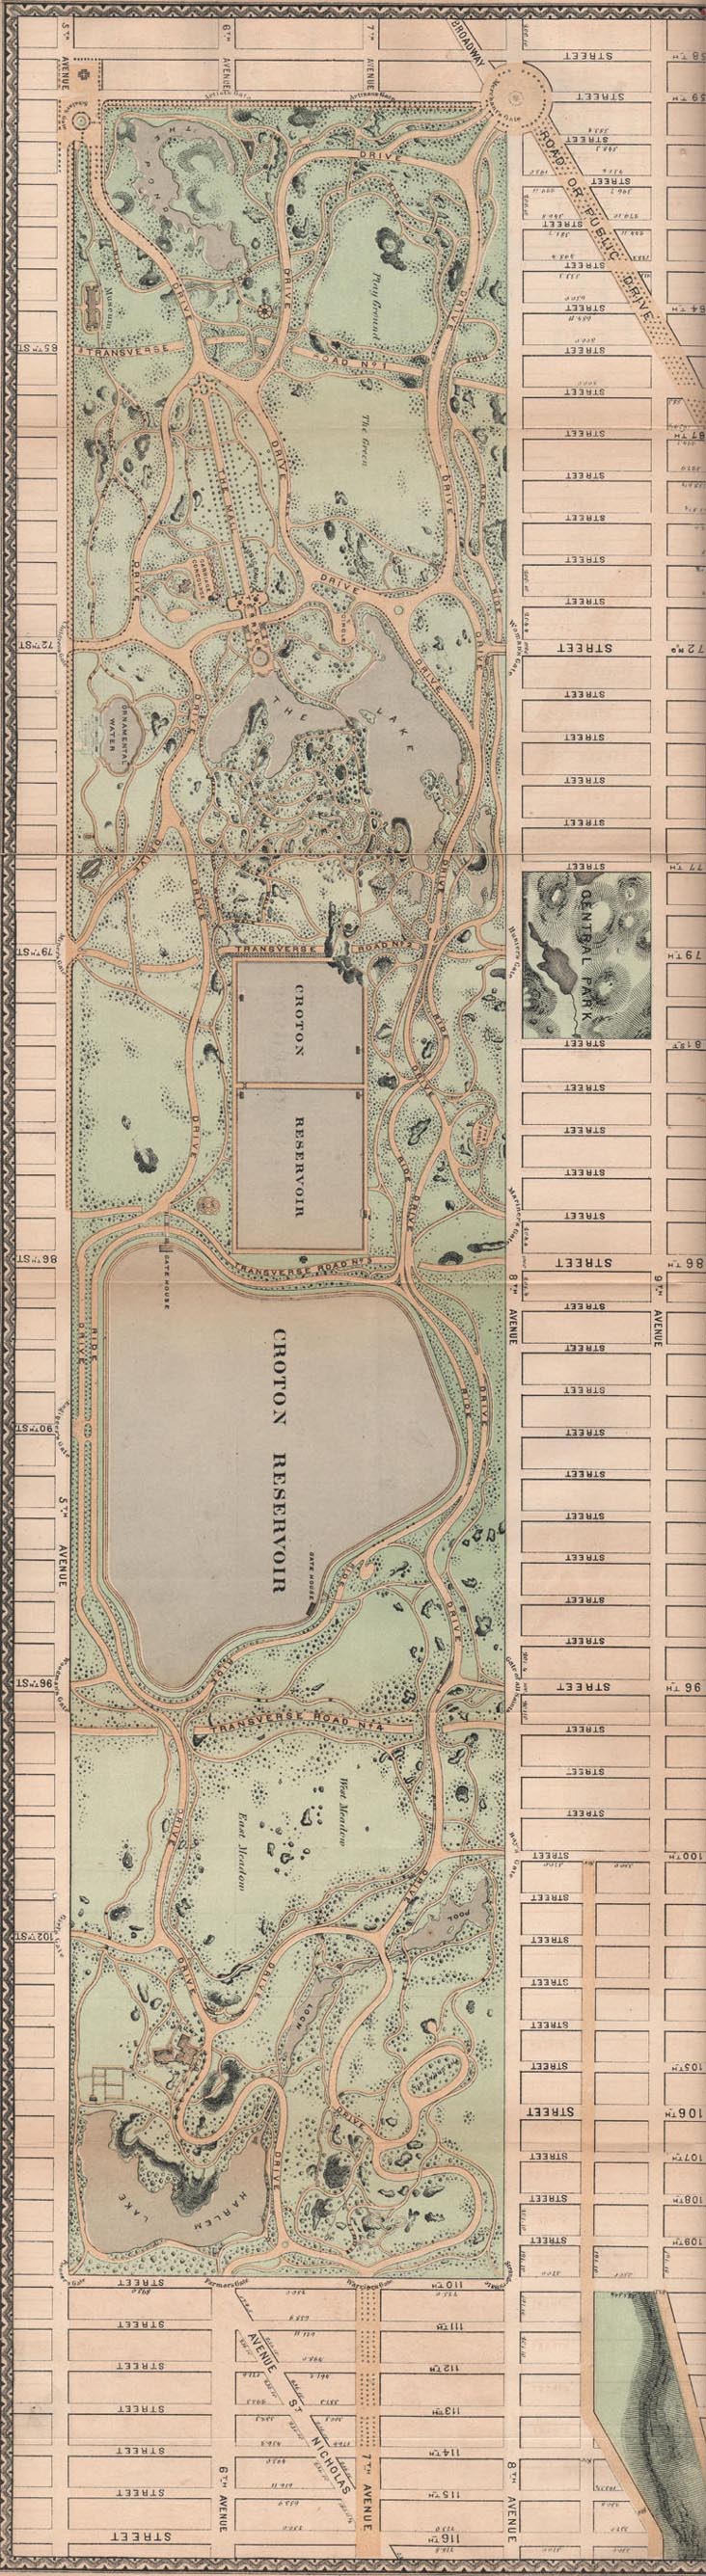 Map of Central Park, 1868 Parks Department Annual Report